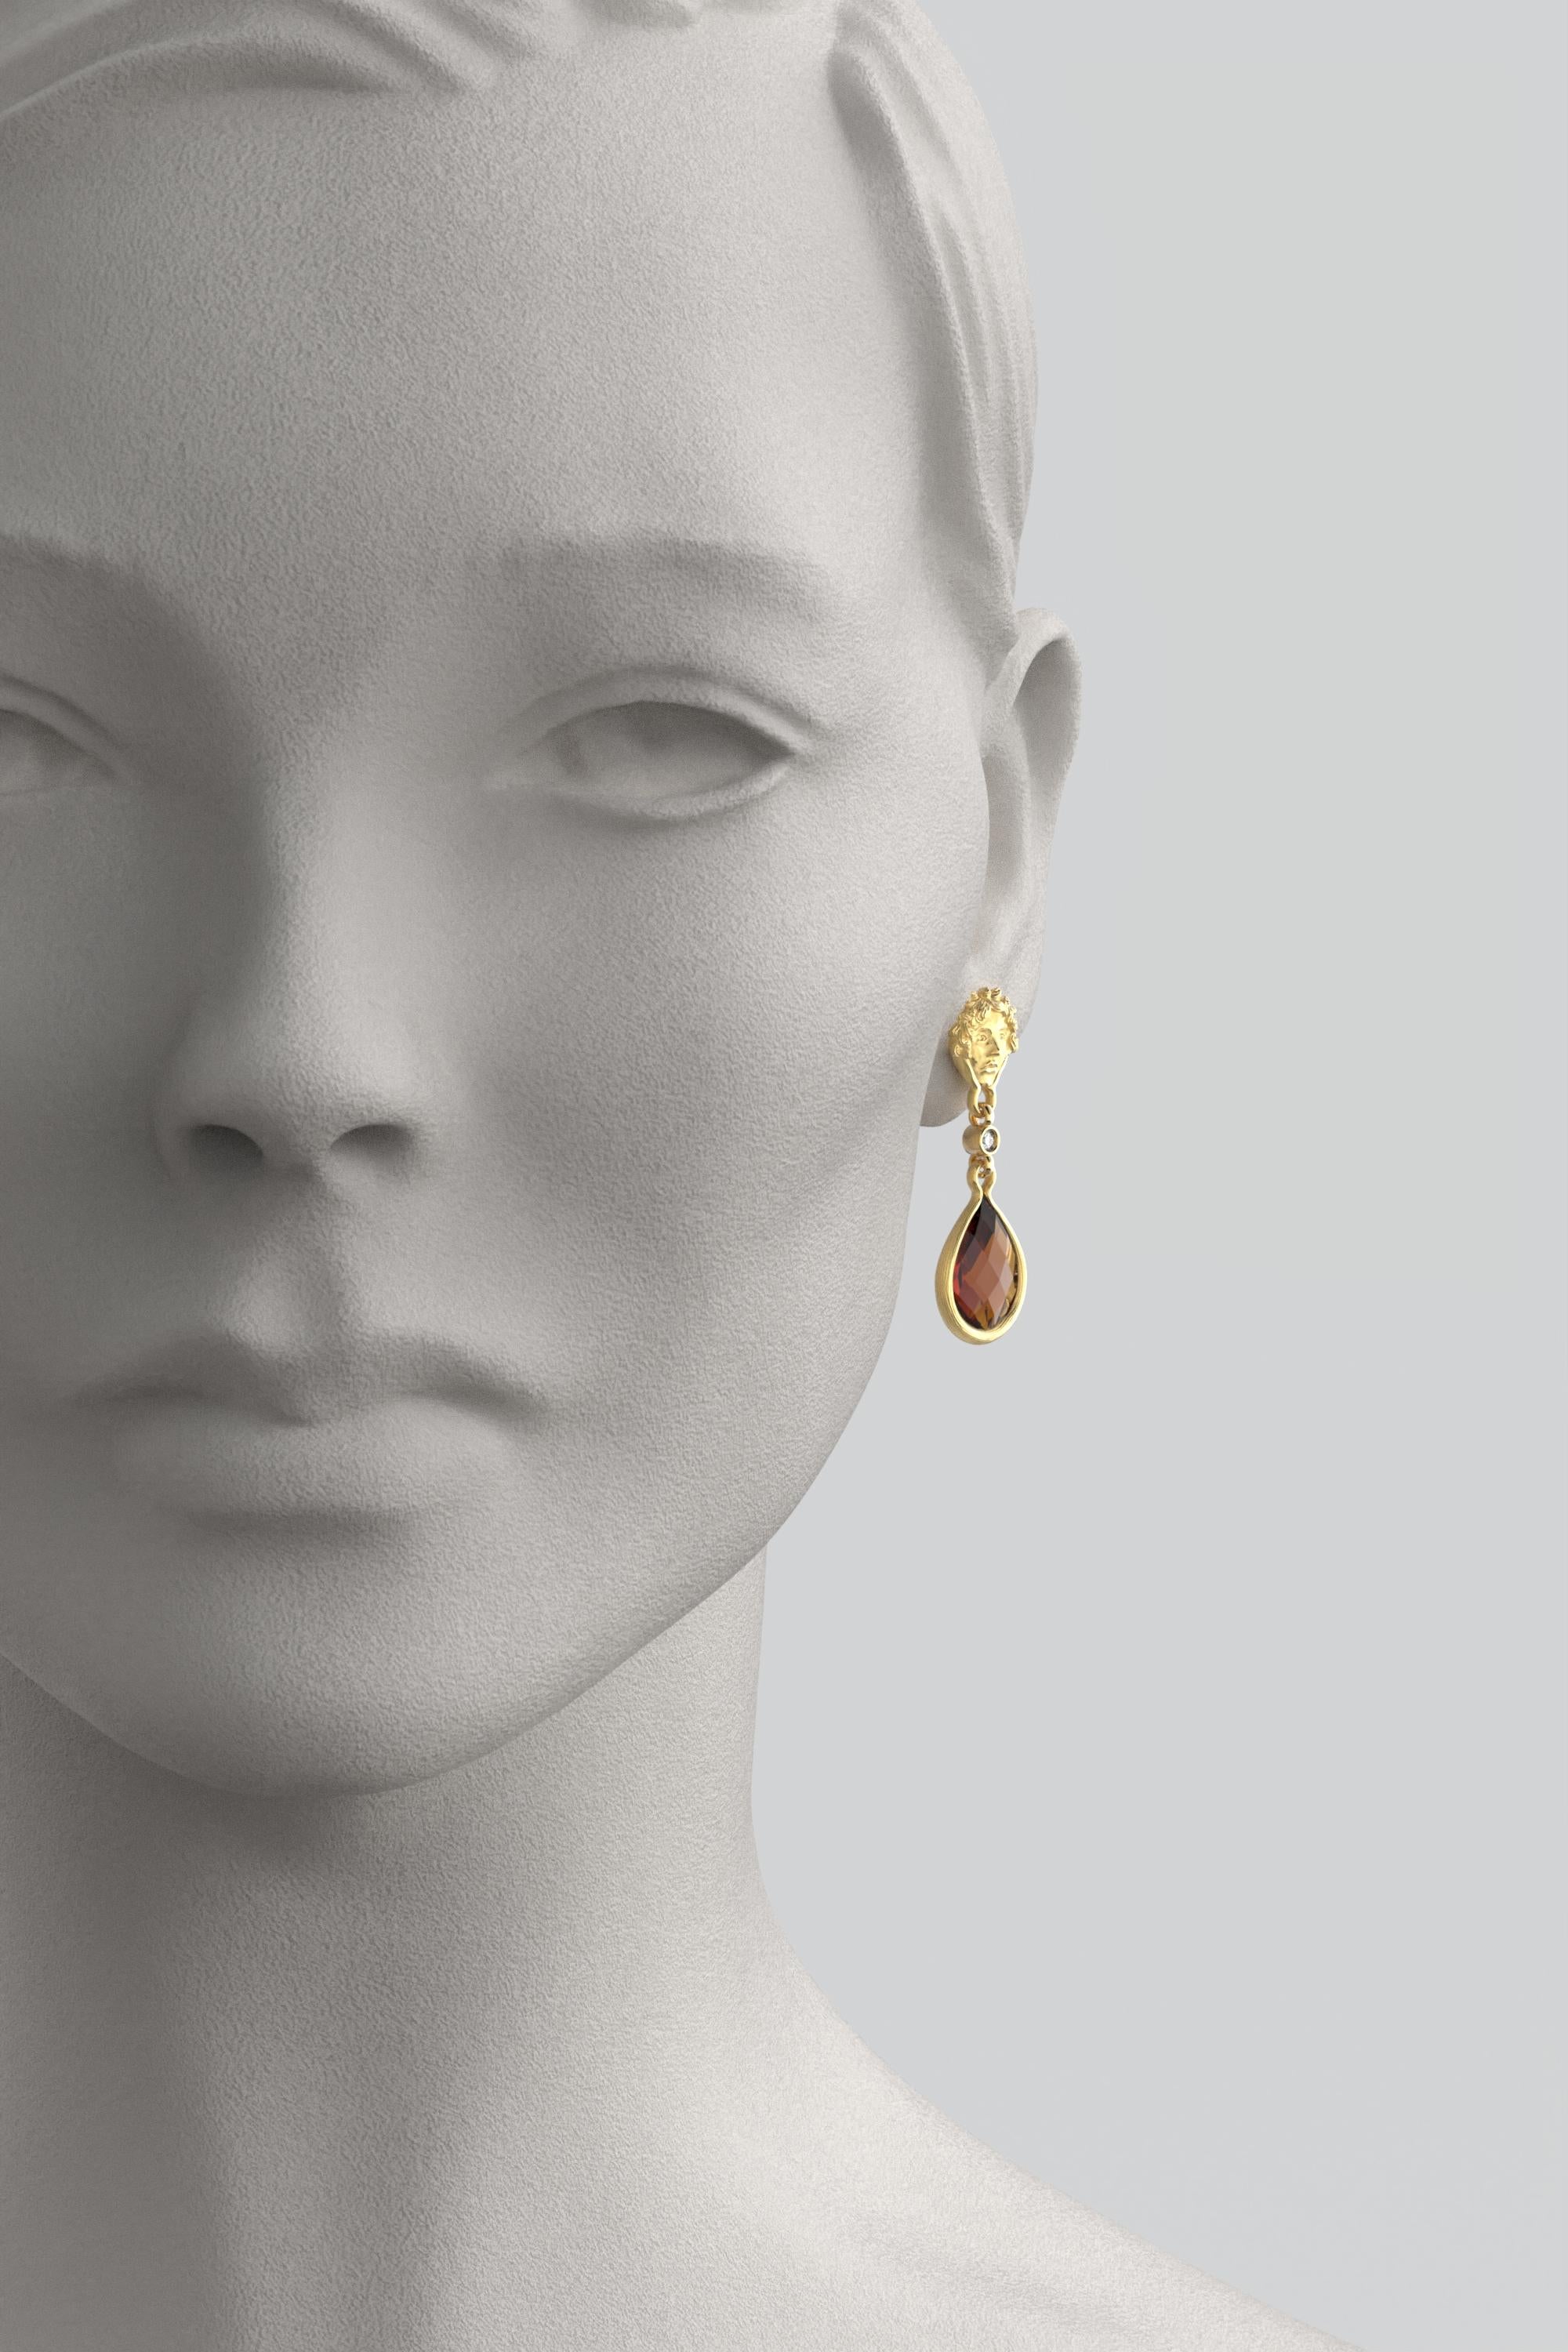 Pear Cut Madeira Citrine and Diamond Dangle Drop Earrings in 18k Solid Gold Made in Italy For Sale